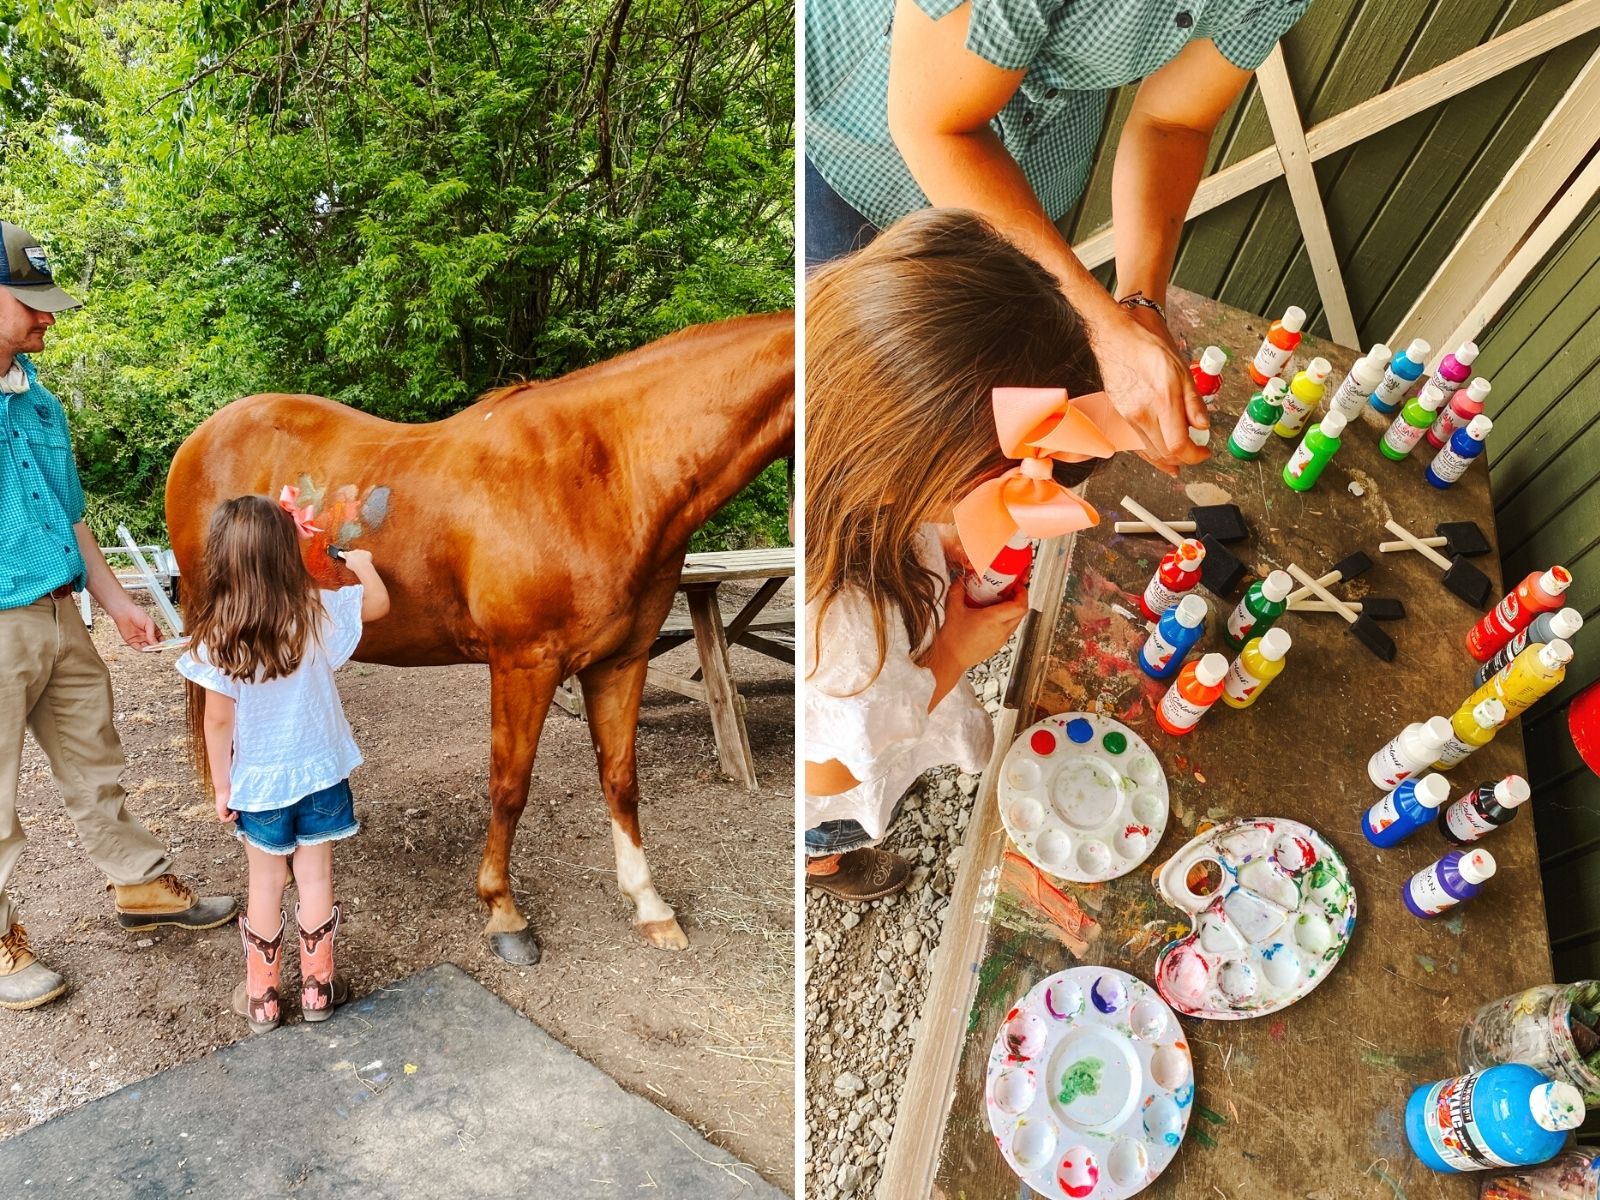 Barnsley Resort by popular Memphis travel blog, Lone Star Looking Glass: collage image of a young girl looking at paint bottles and painting a floral design on the side of a horse. 